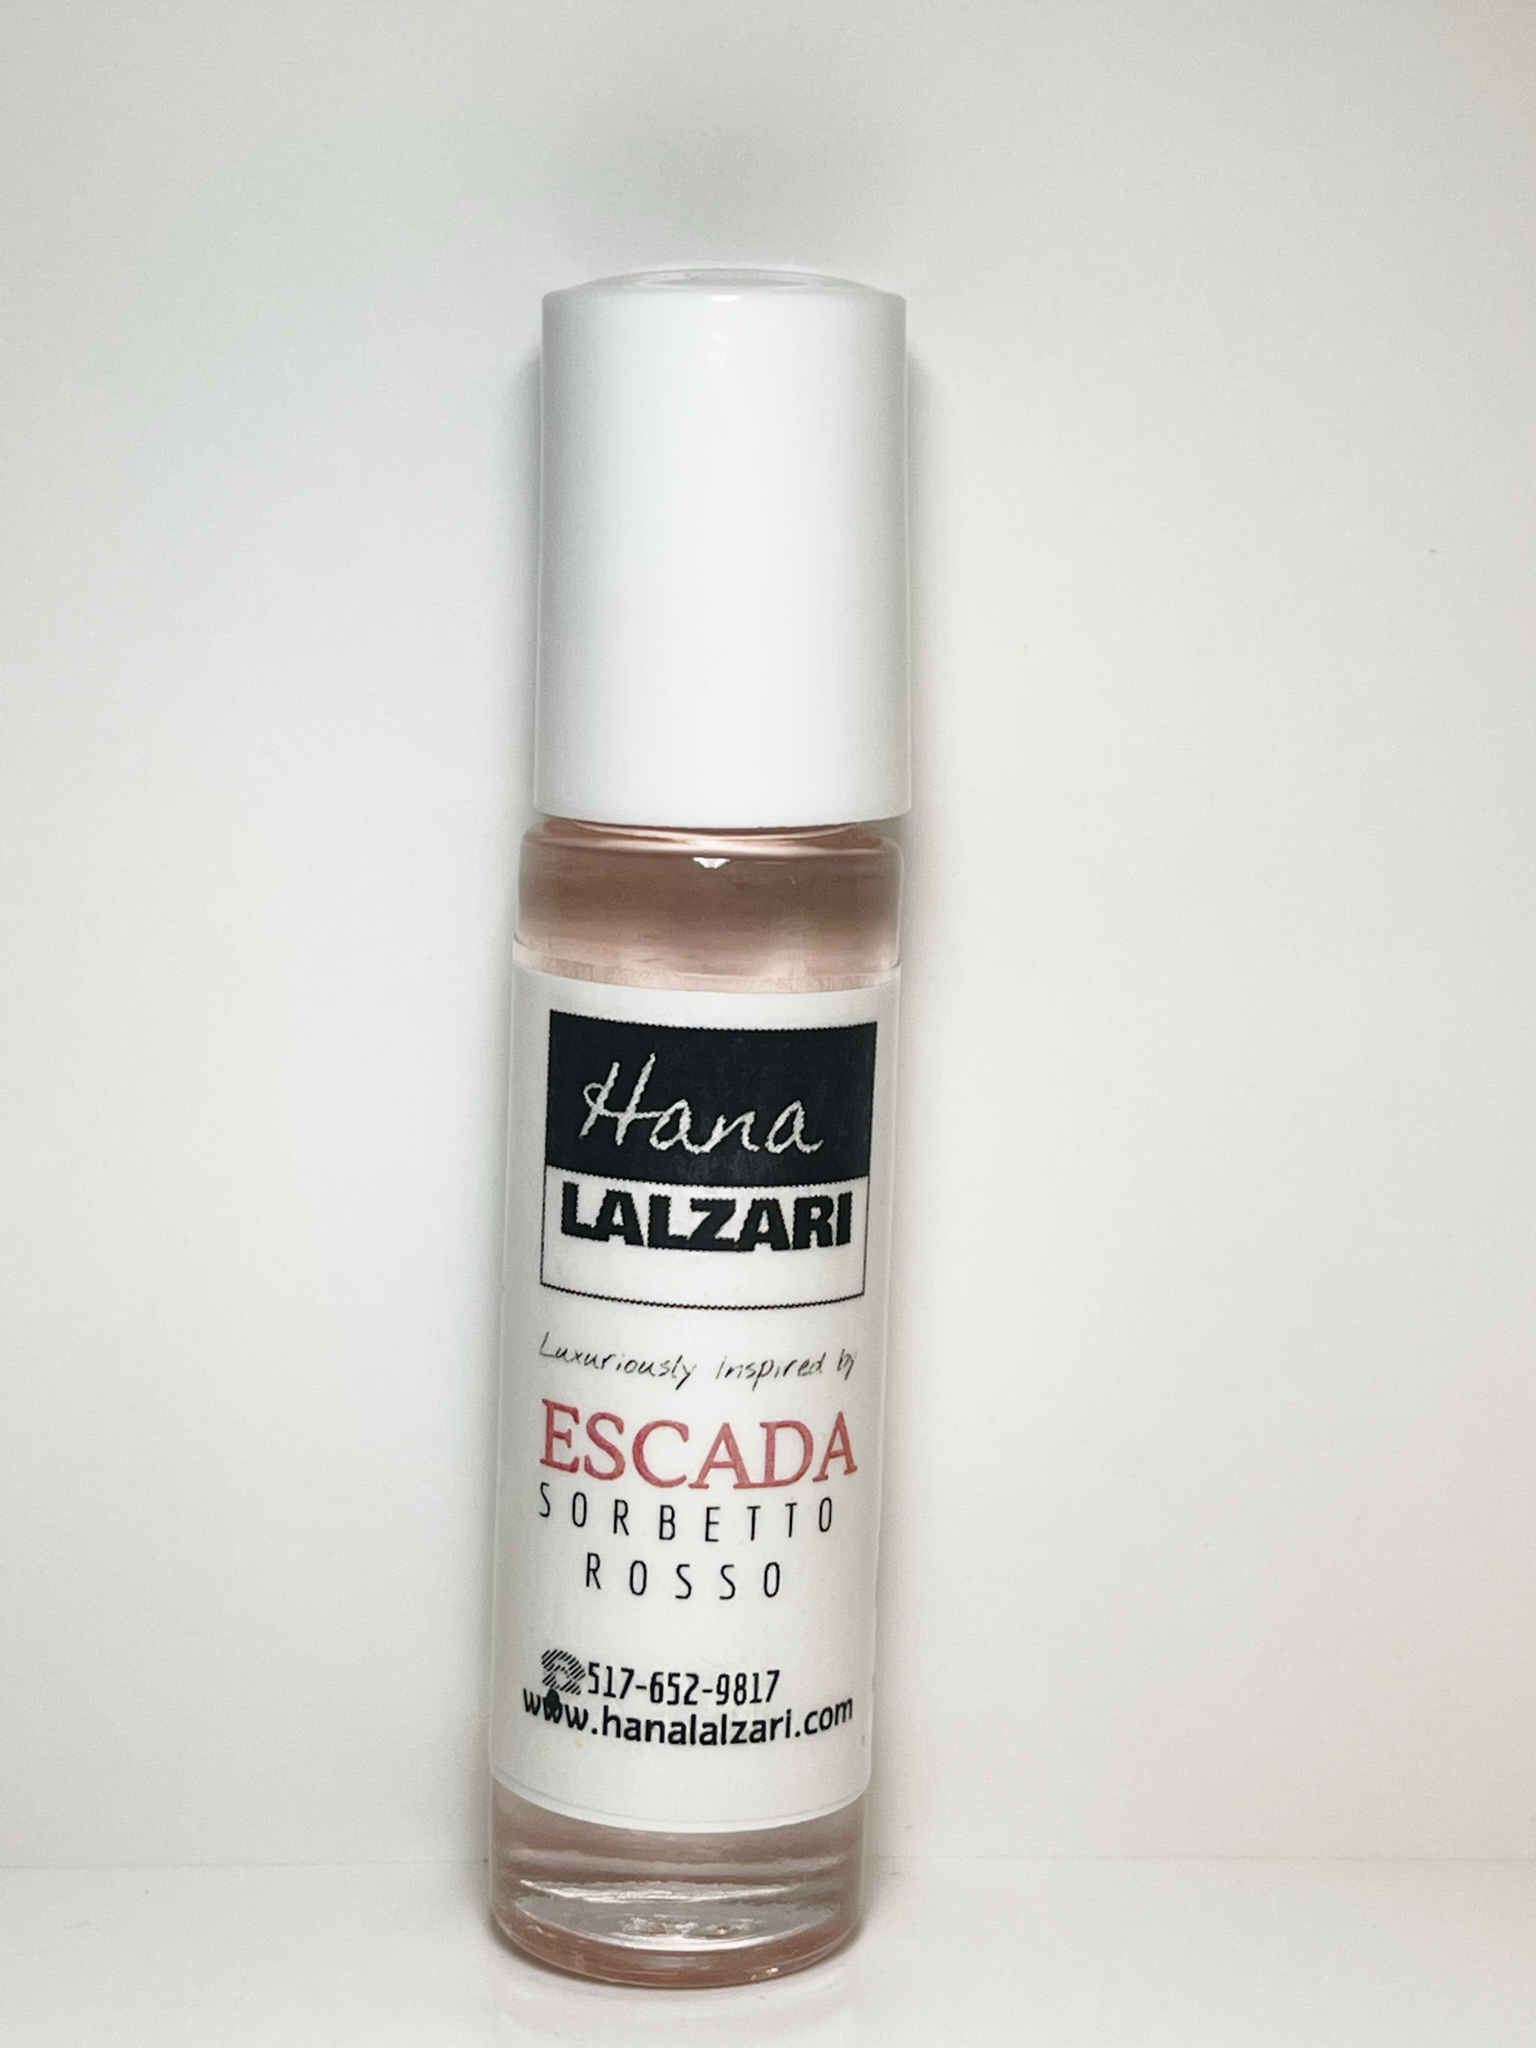 Luxuriously Inspired by Escada Sorbetto Rosso